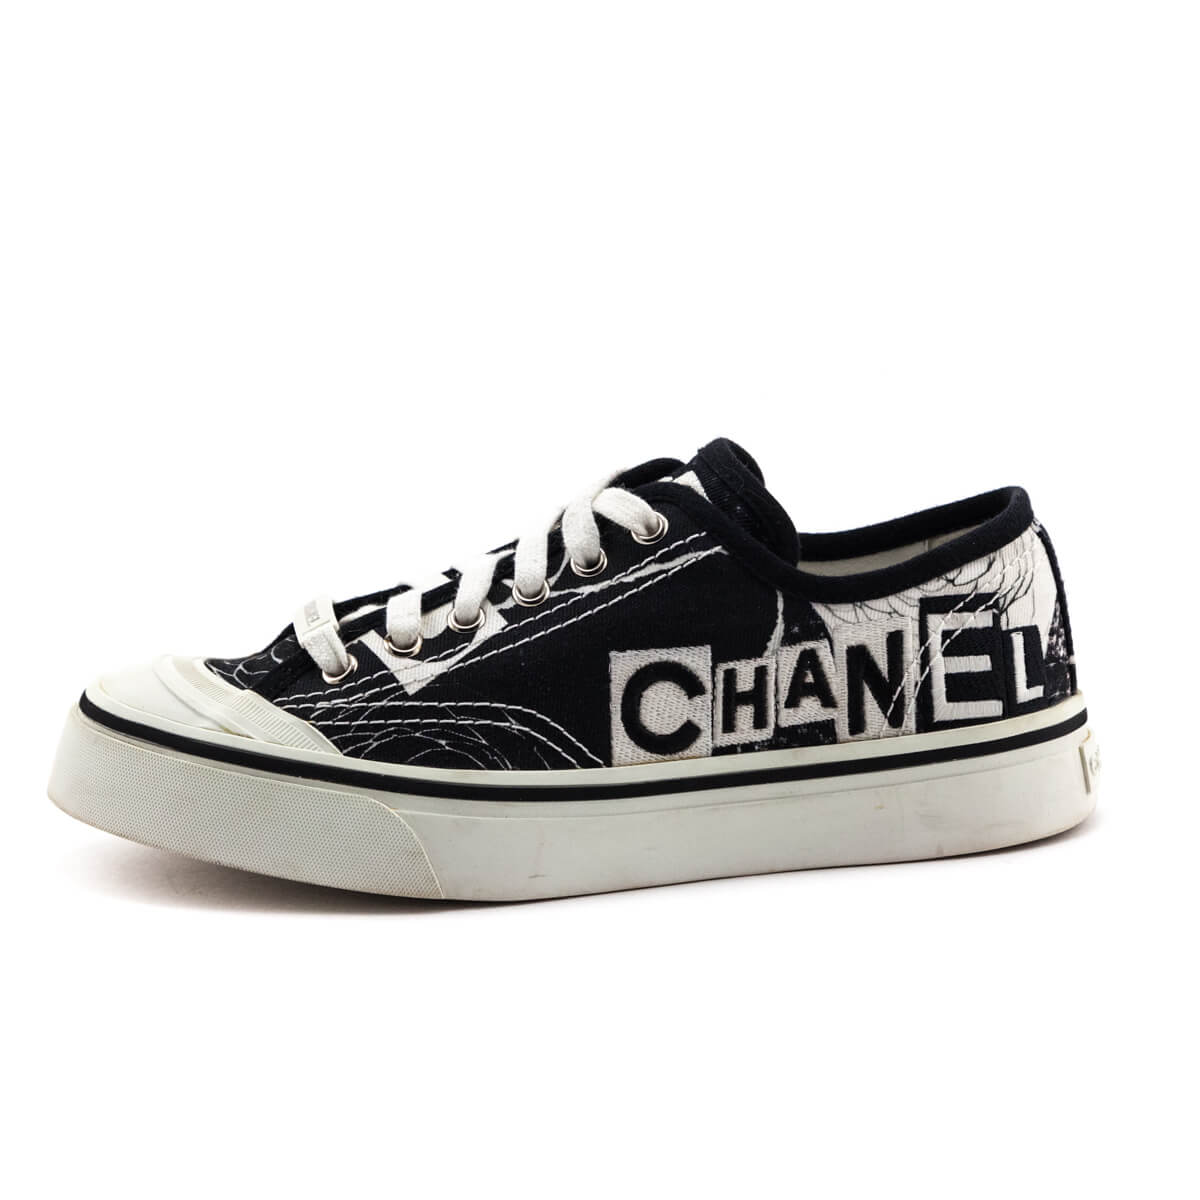 Chanel Black & White Canvas Printed Low Top Sneakers - Chanel